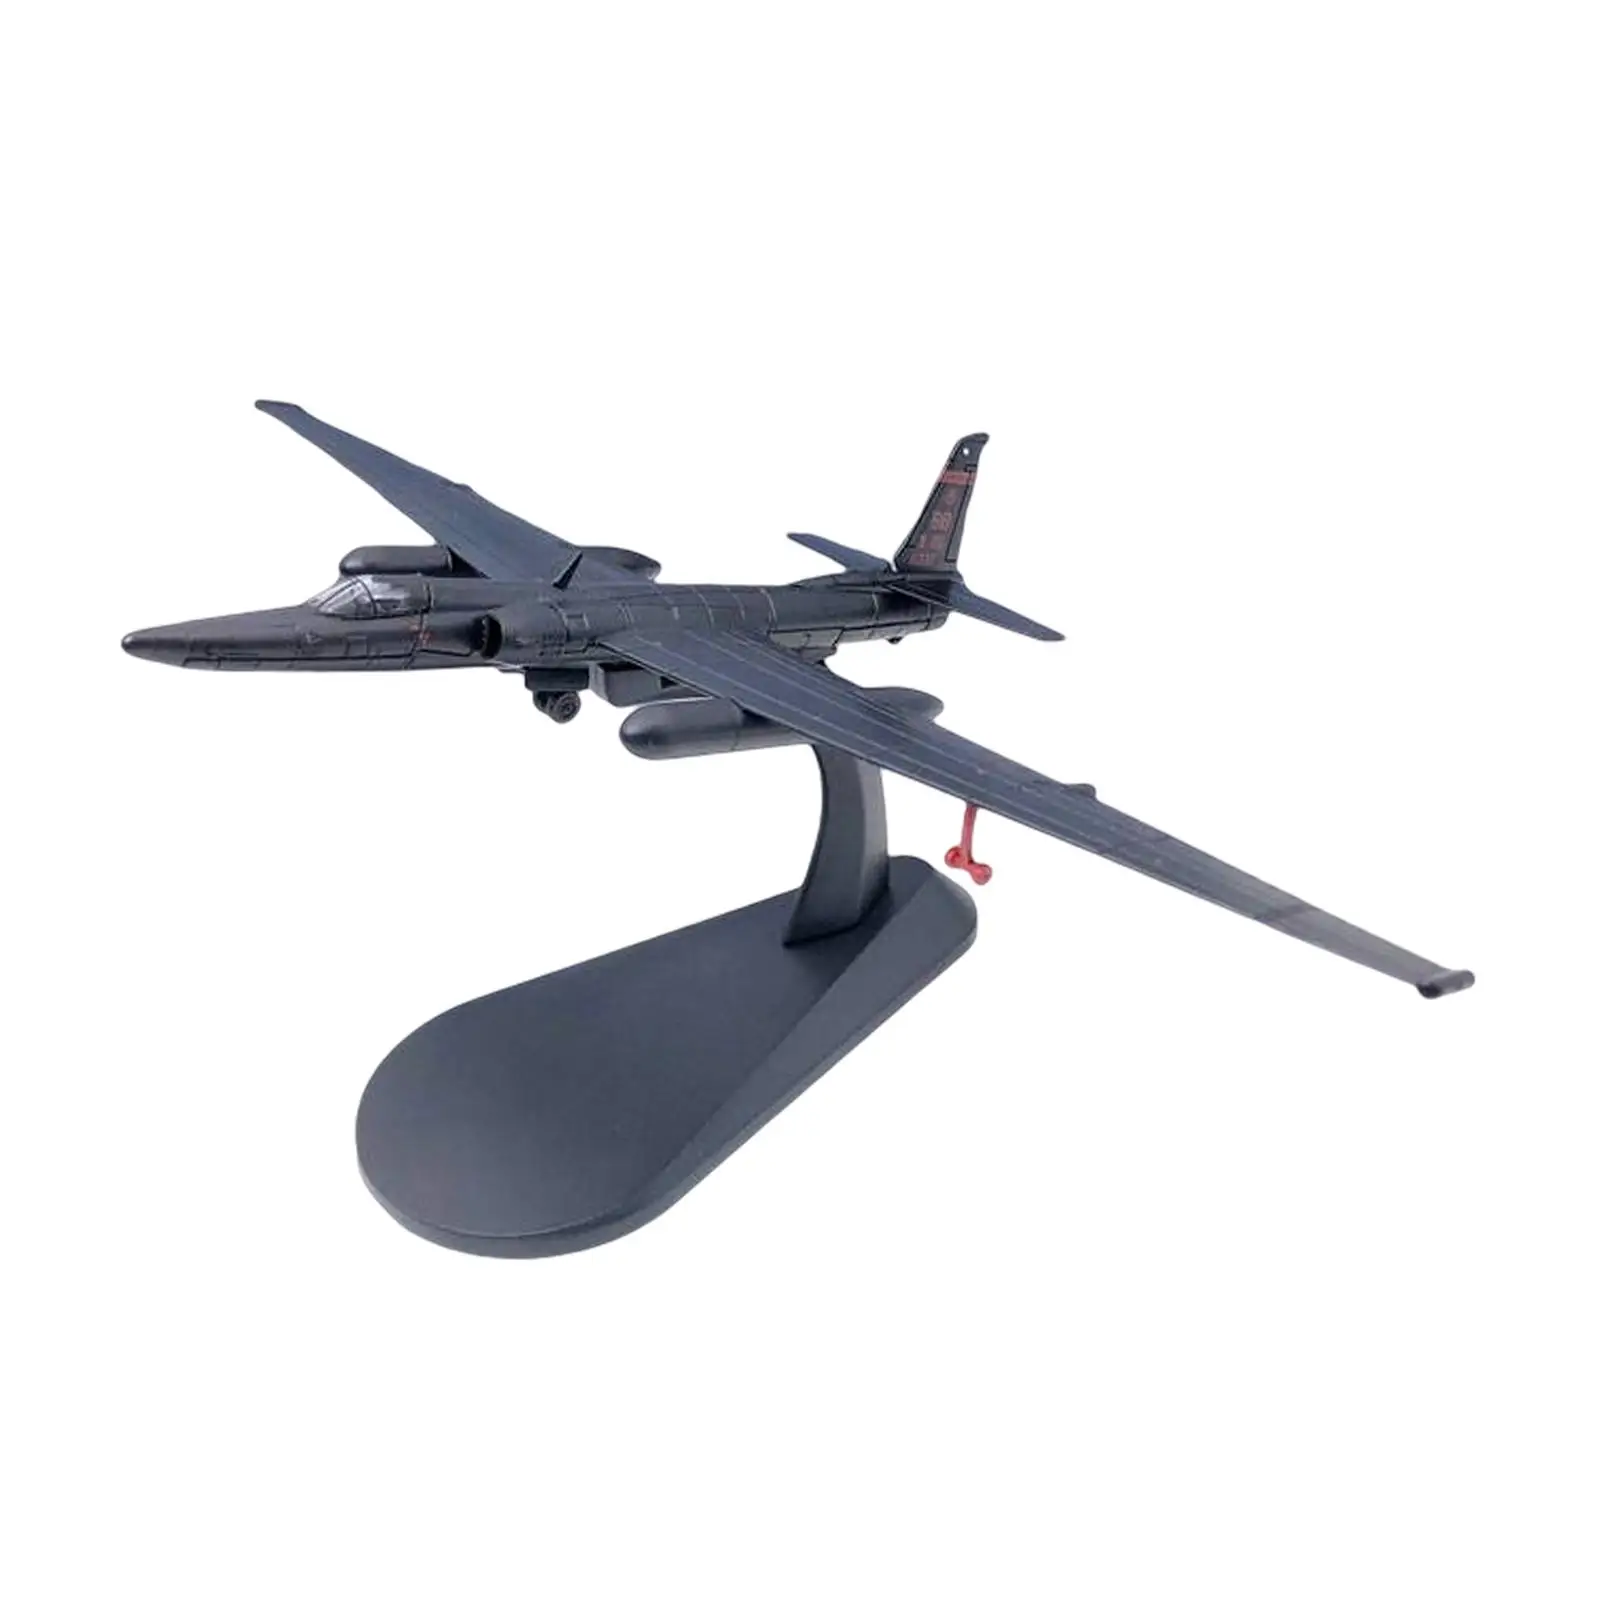 1/144 U2 Reconnaissance Aircraft Model with Display Stand, Decoration Collectibles